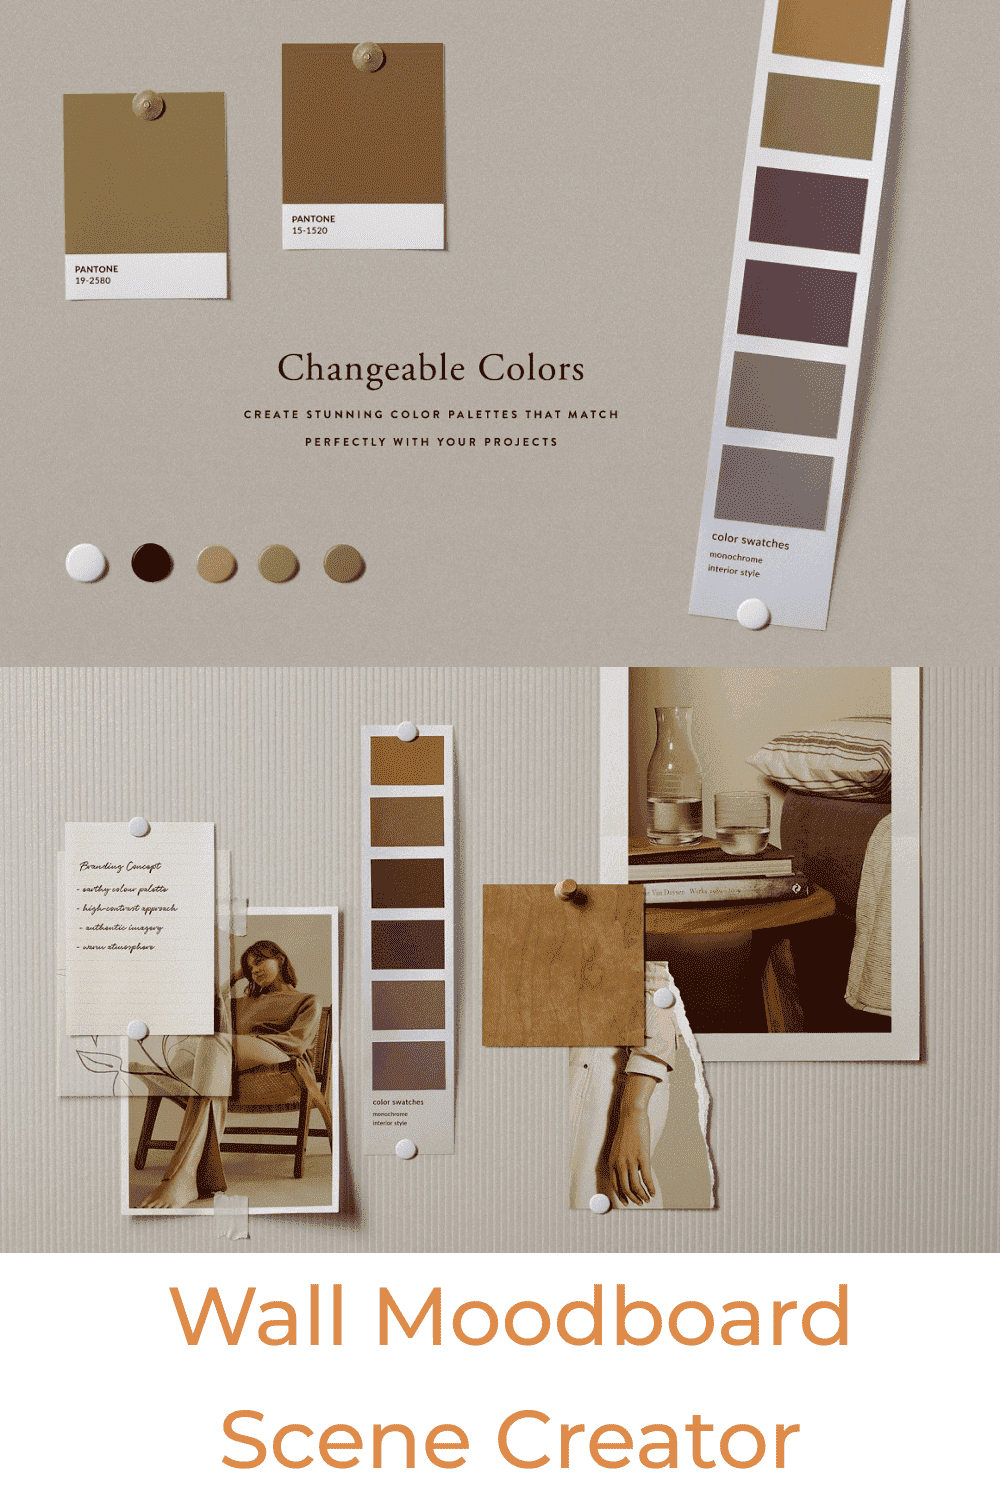 Wall Moodboard Scene Creator - Create Stunning Color Palettes That Match Perfectly With Your Projects.